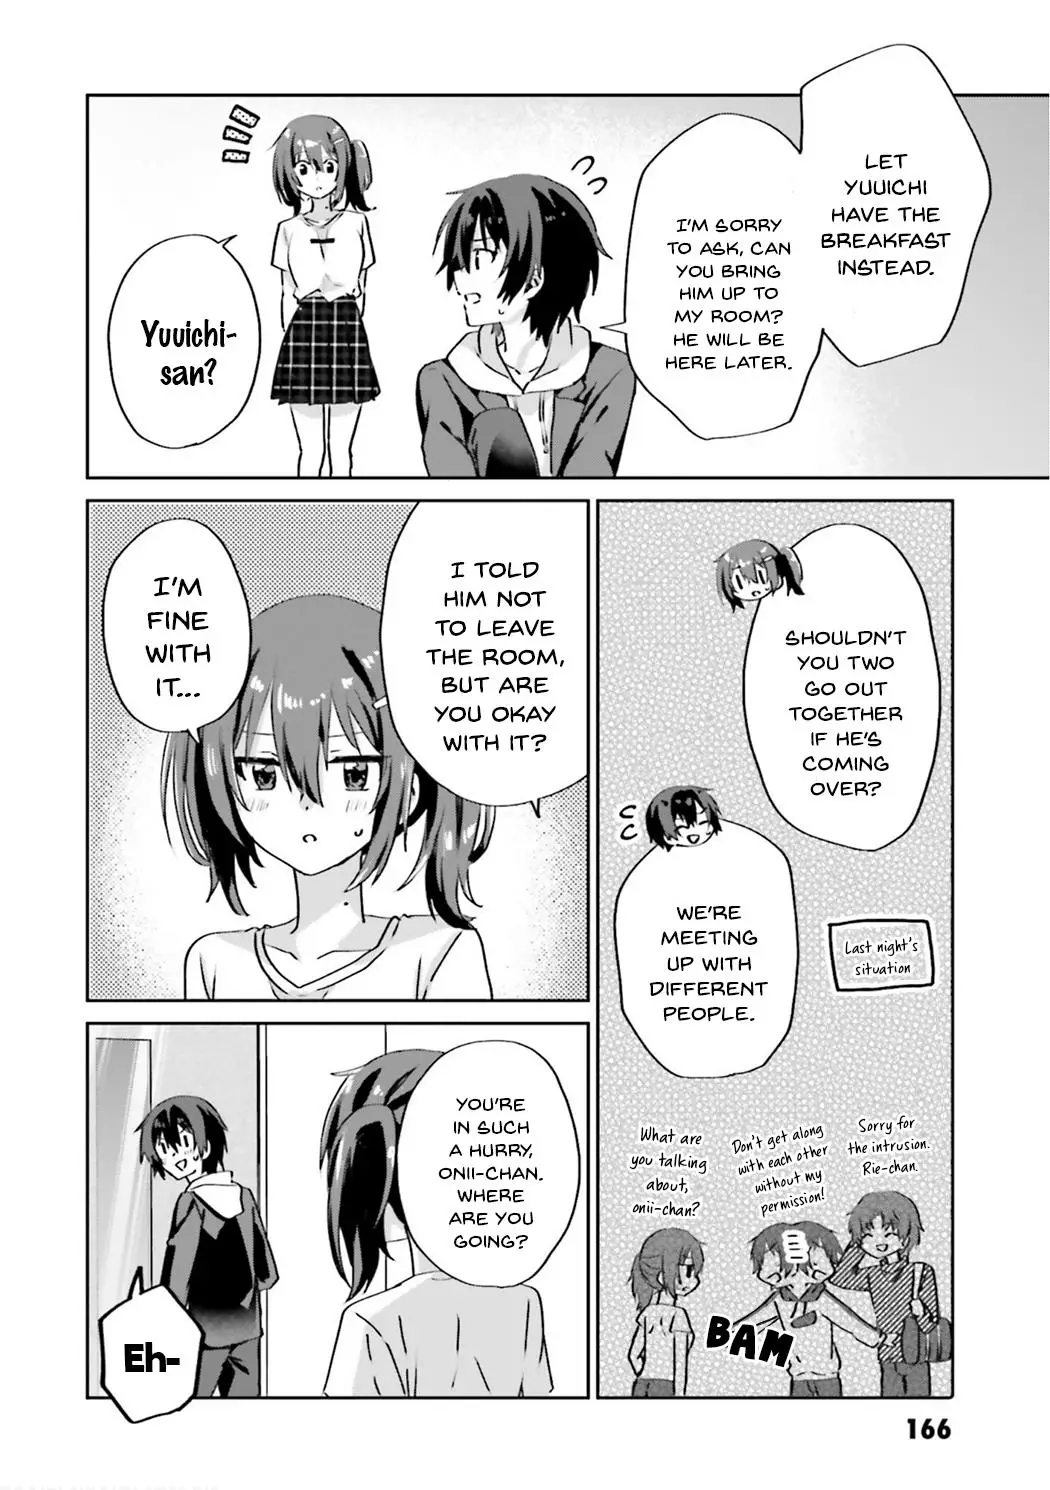 Since I’Ve Entered The World Of Romantic Comedy Manga, I’Ll Do My Best To Make The Losing Heroine Happy - 6.5 page 2-0582a626